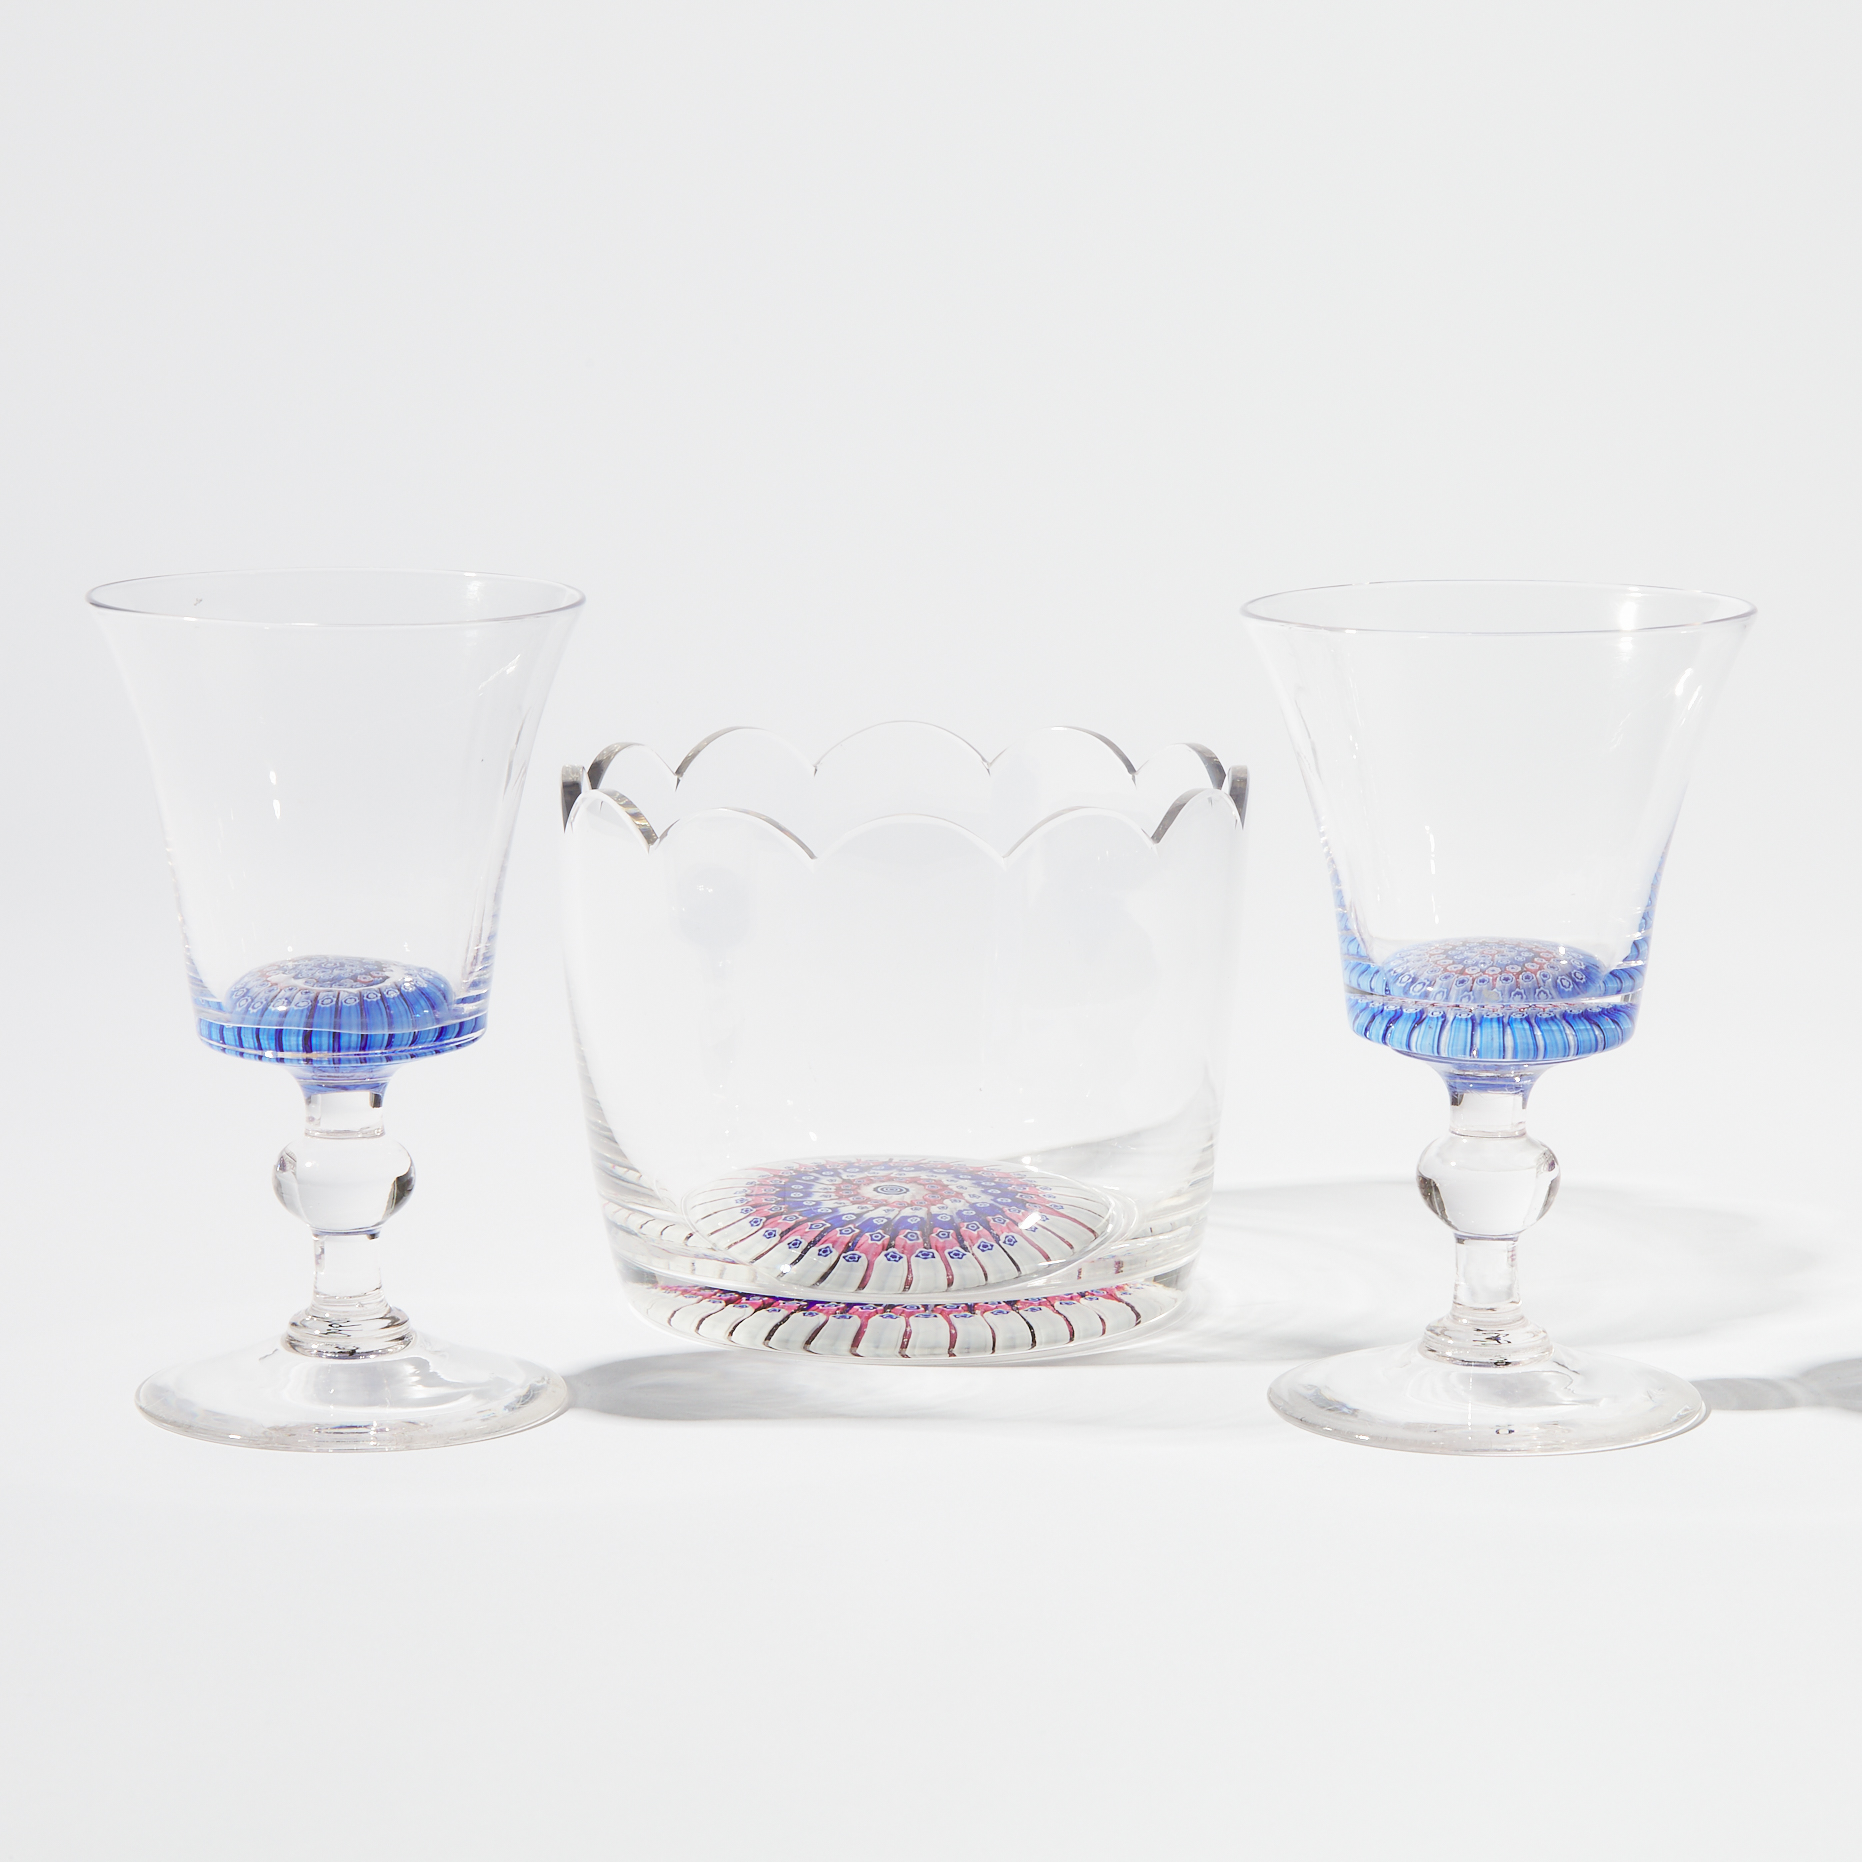 Pair of Whitefriars Concentric Millefiori Glass Goblets and Scalloped Edge Bowl, 20th century